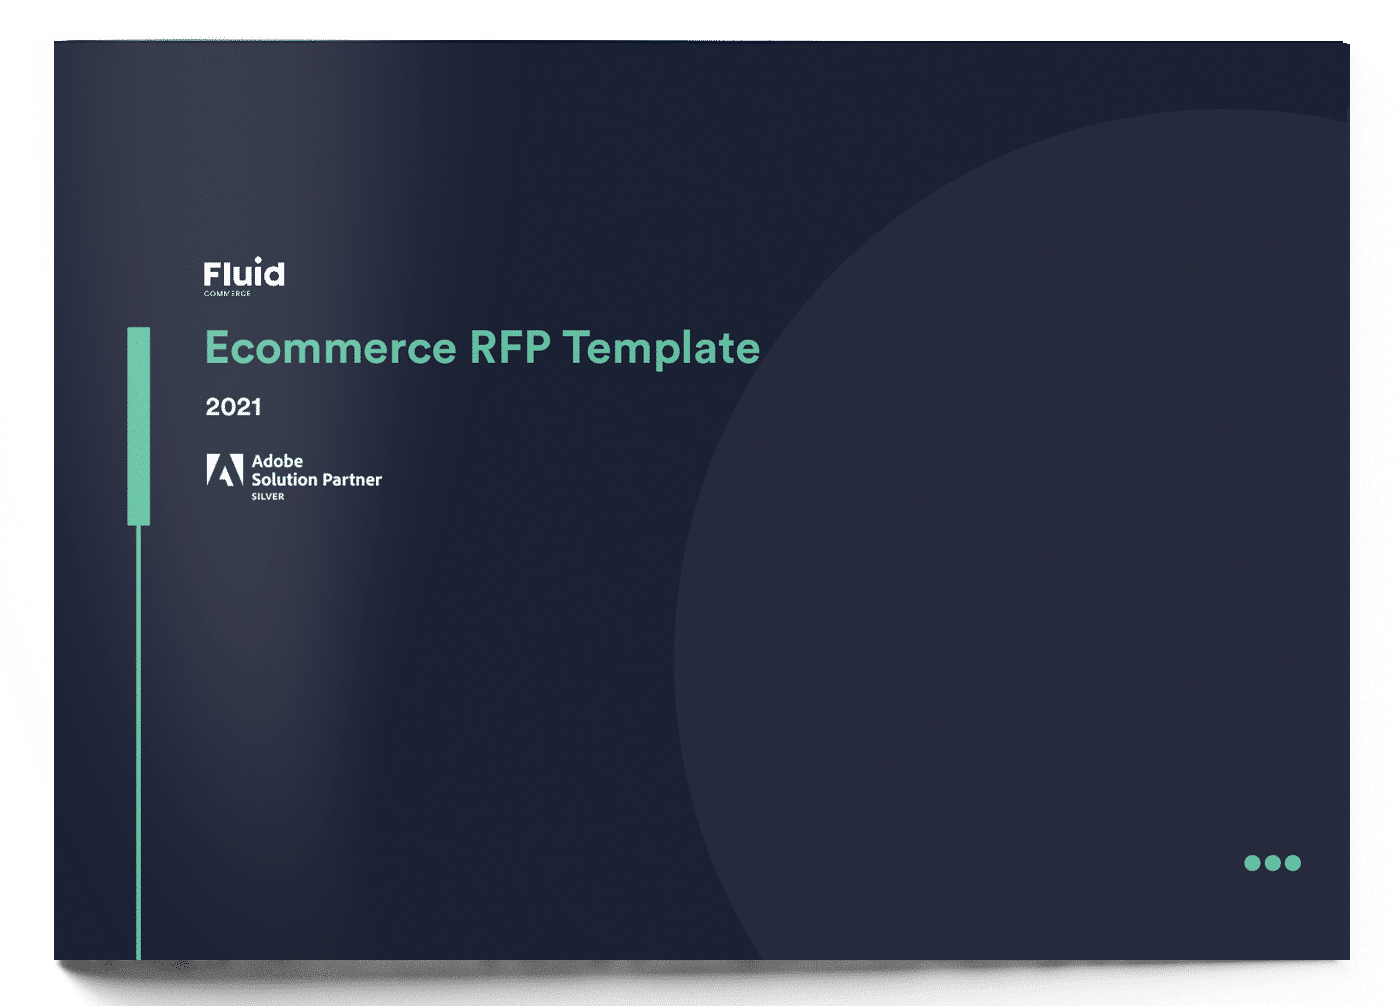 Ecommerce RFP Template Cover